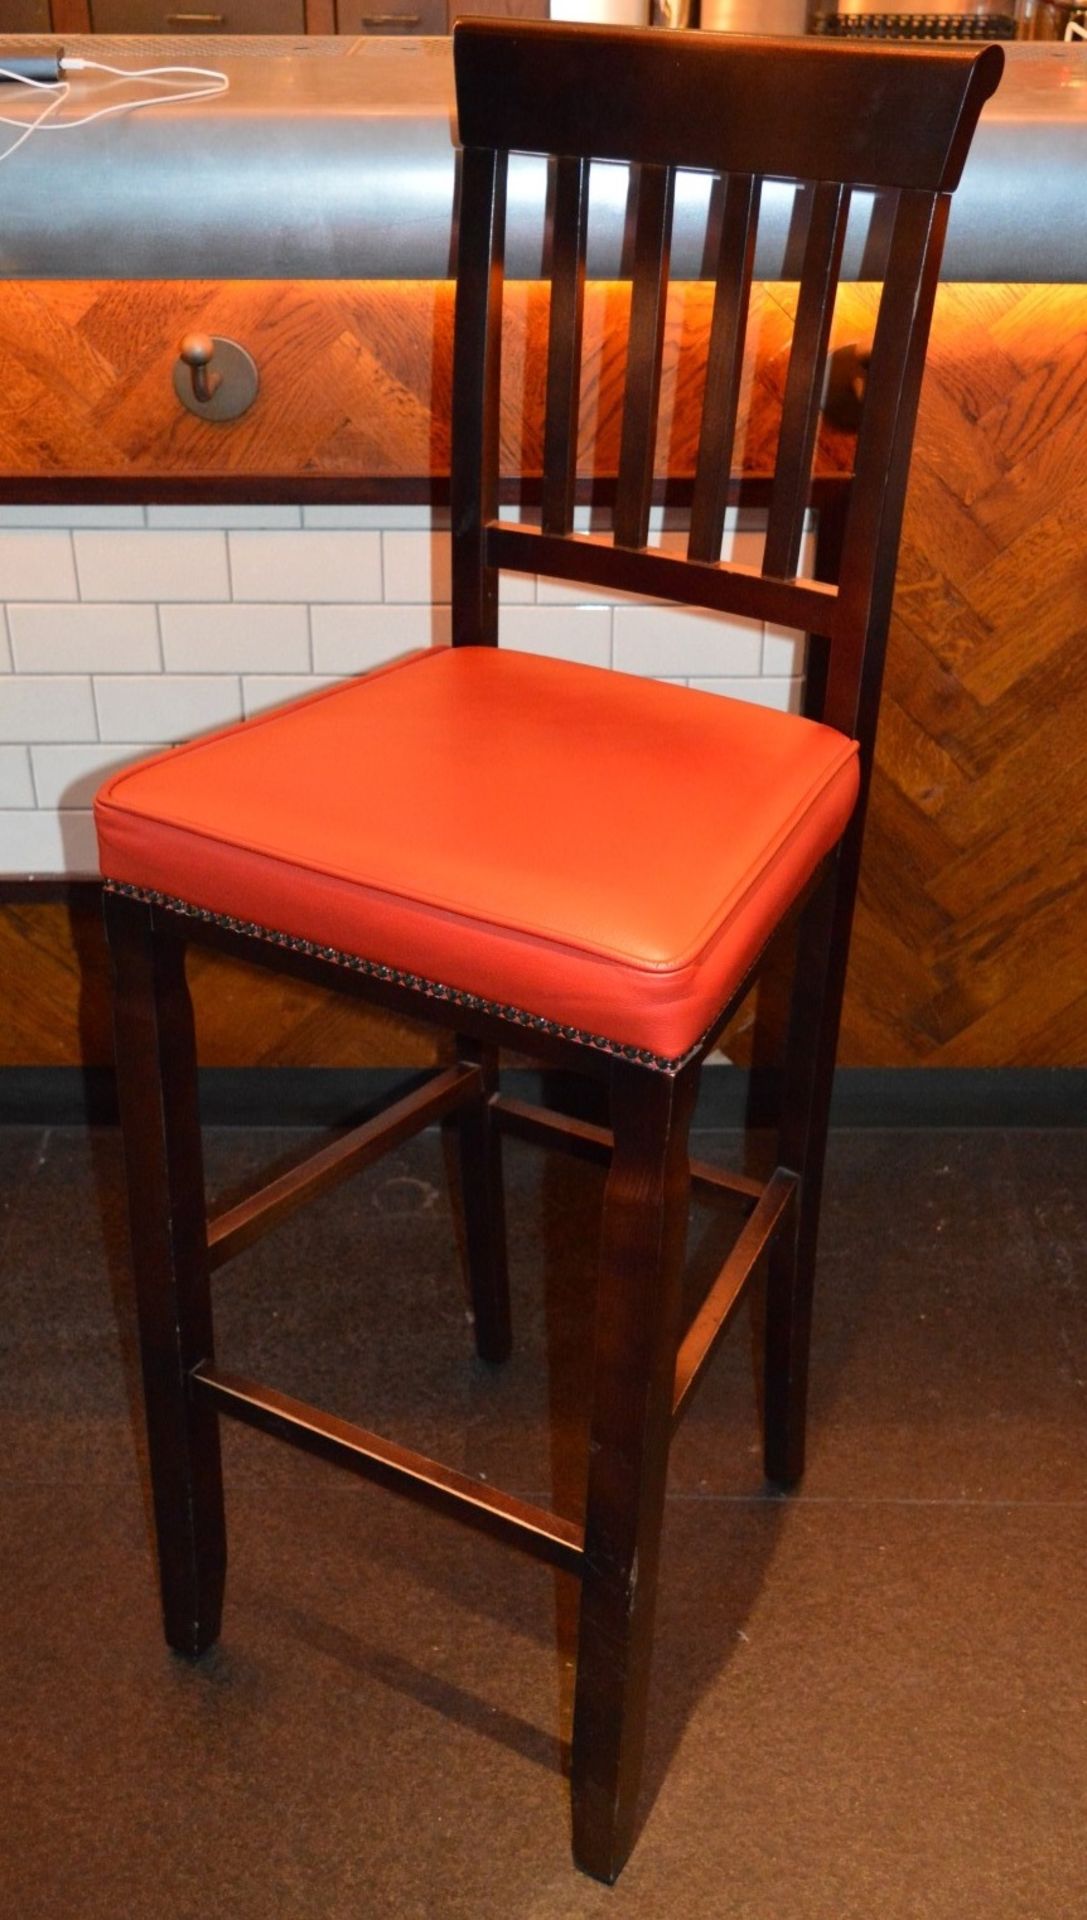 4 x Tall 'Harley' Bar Stools - Recently Removed From A City Centre Restaurant - Image 3 of 5